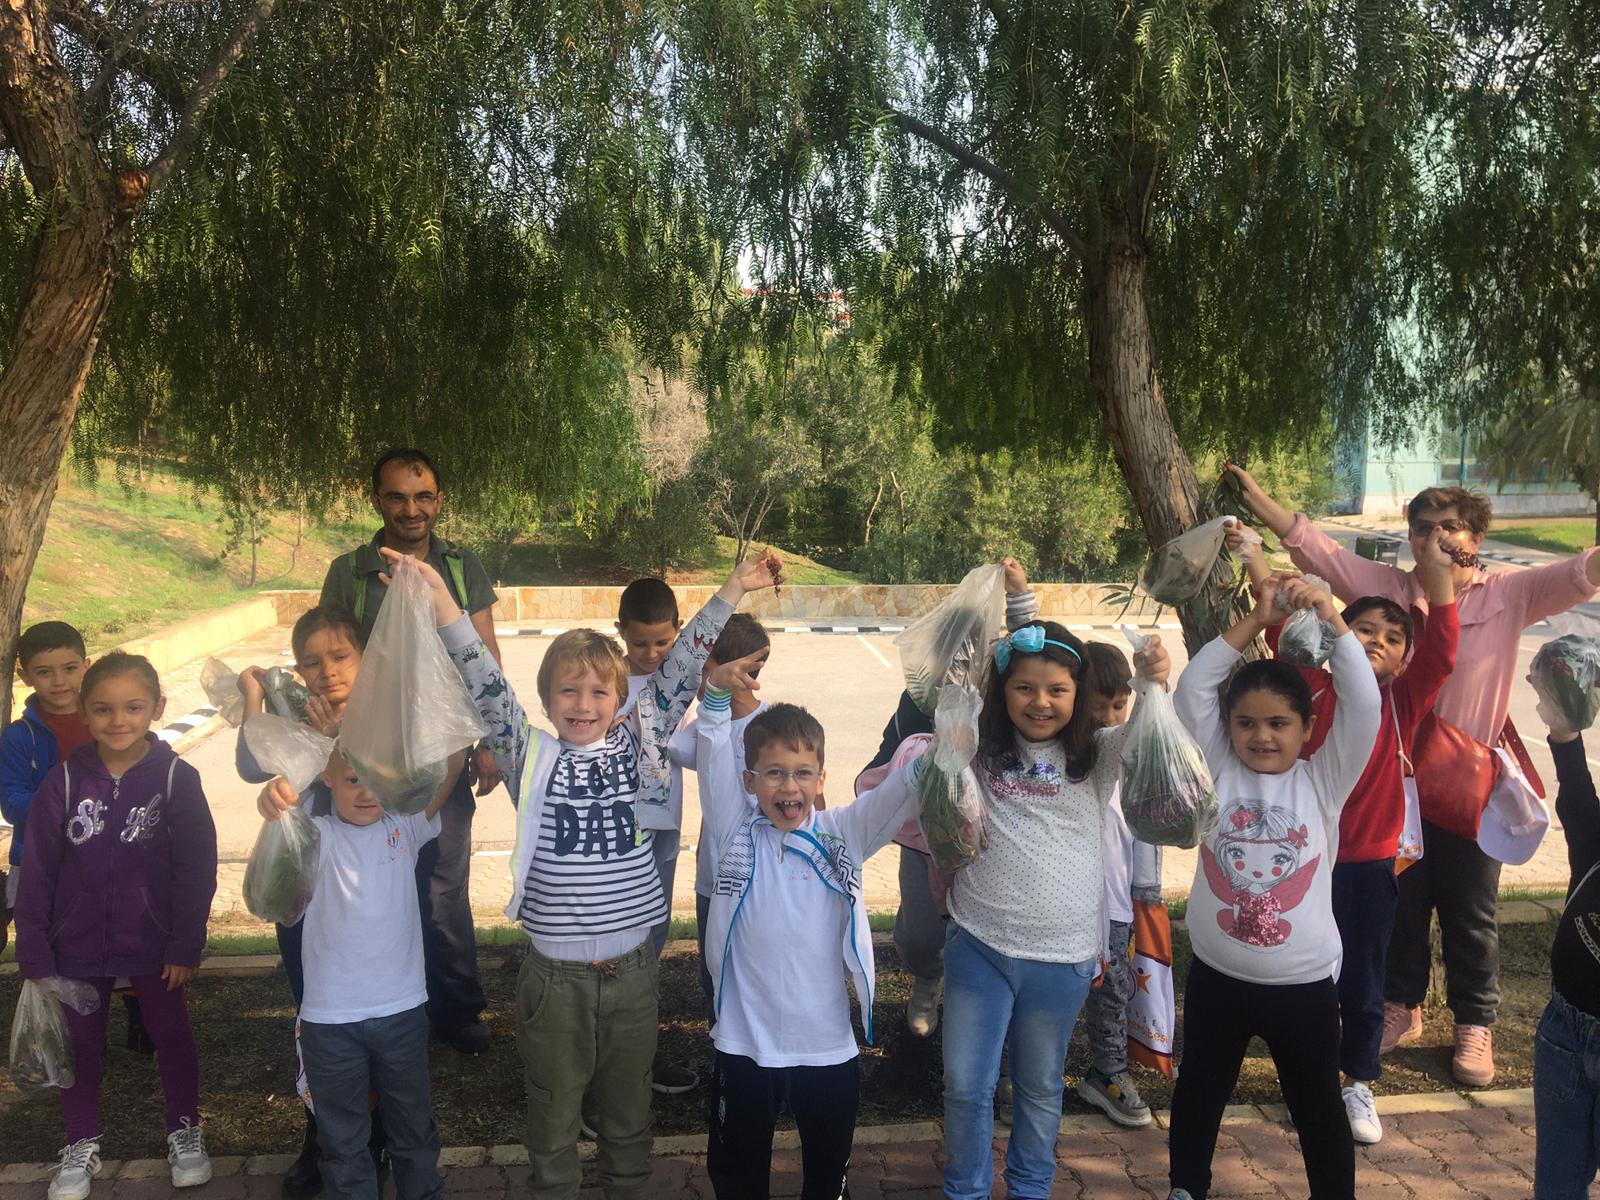 Getting familiarized with the trees and plants, they learned the details about the Horseback Riding…The Fall Term Program Activities of Özay Günsel Children’s University continue